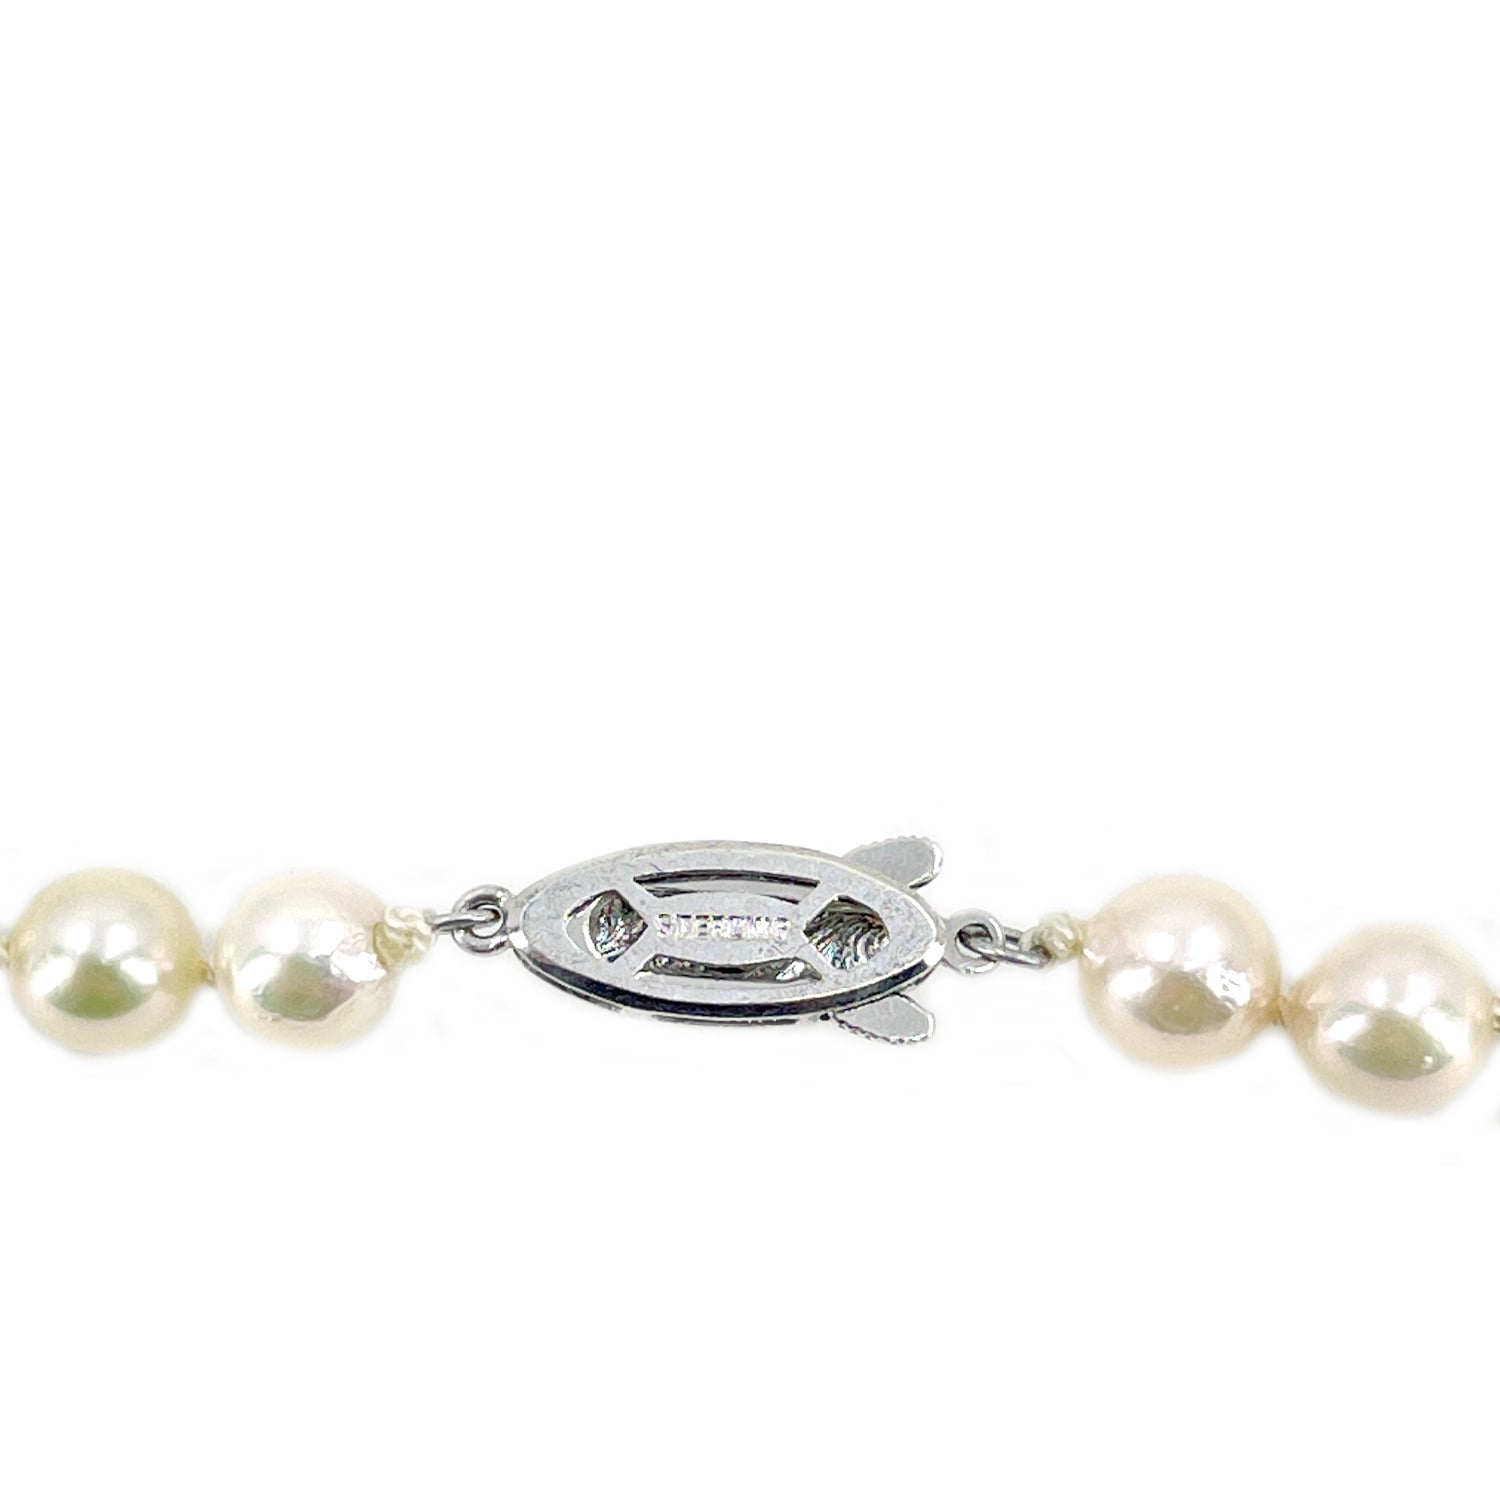 Vintage Long Engraved Japanese Saltwater Cultured Akoya Pearl Necklace - Sterling Silver 24.50 Inch